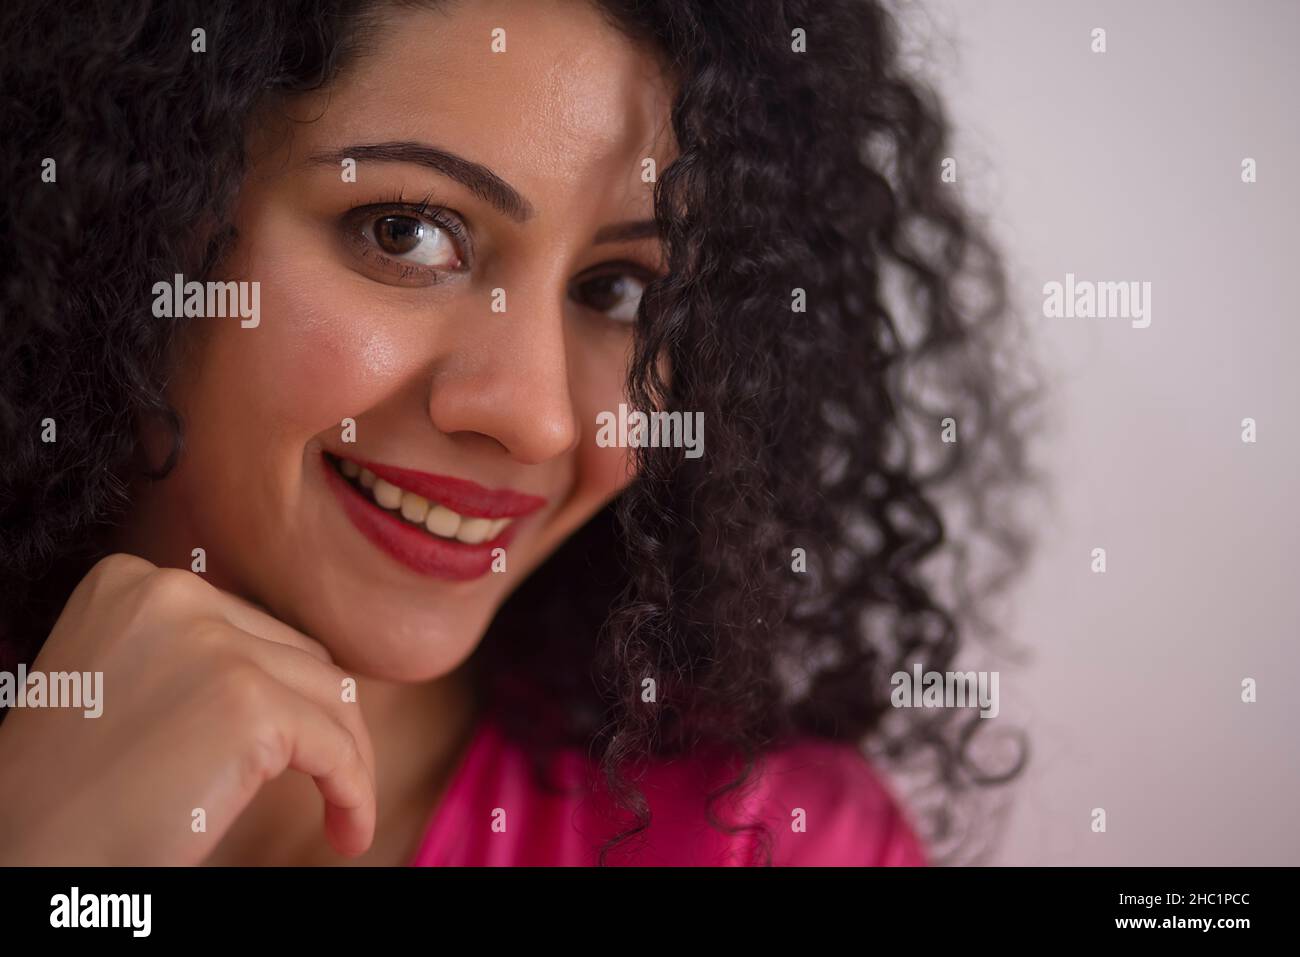 Close-up portrait of a beautiful smiling young woman Stock Photo